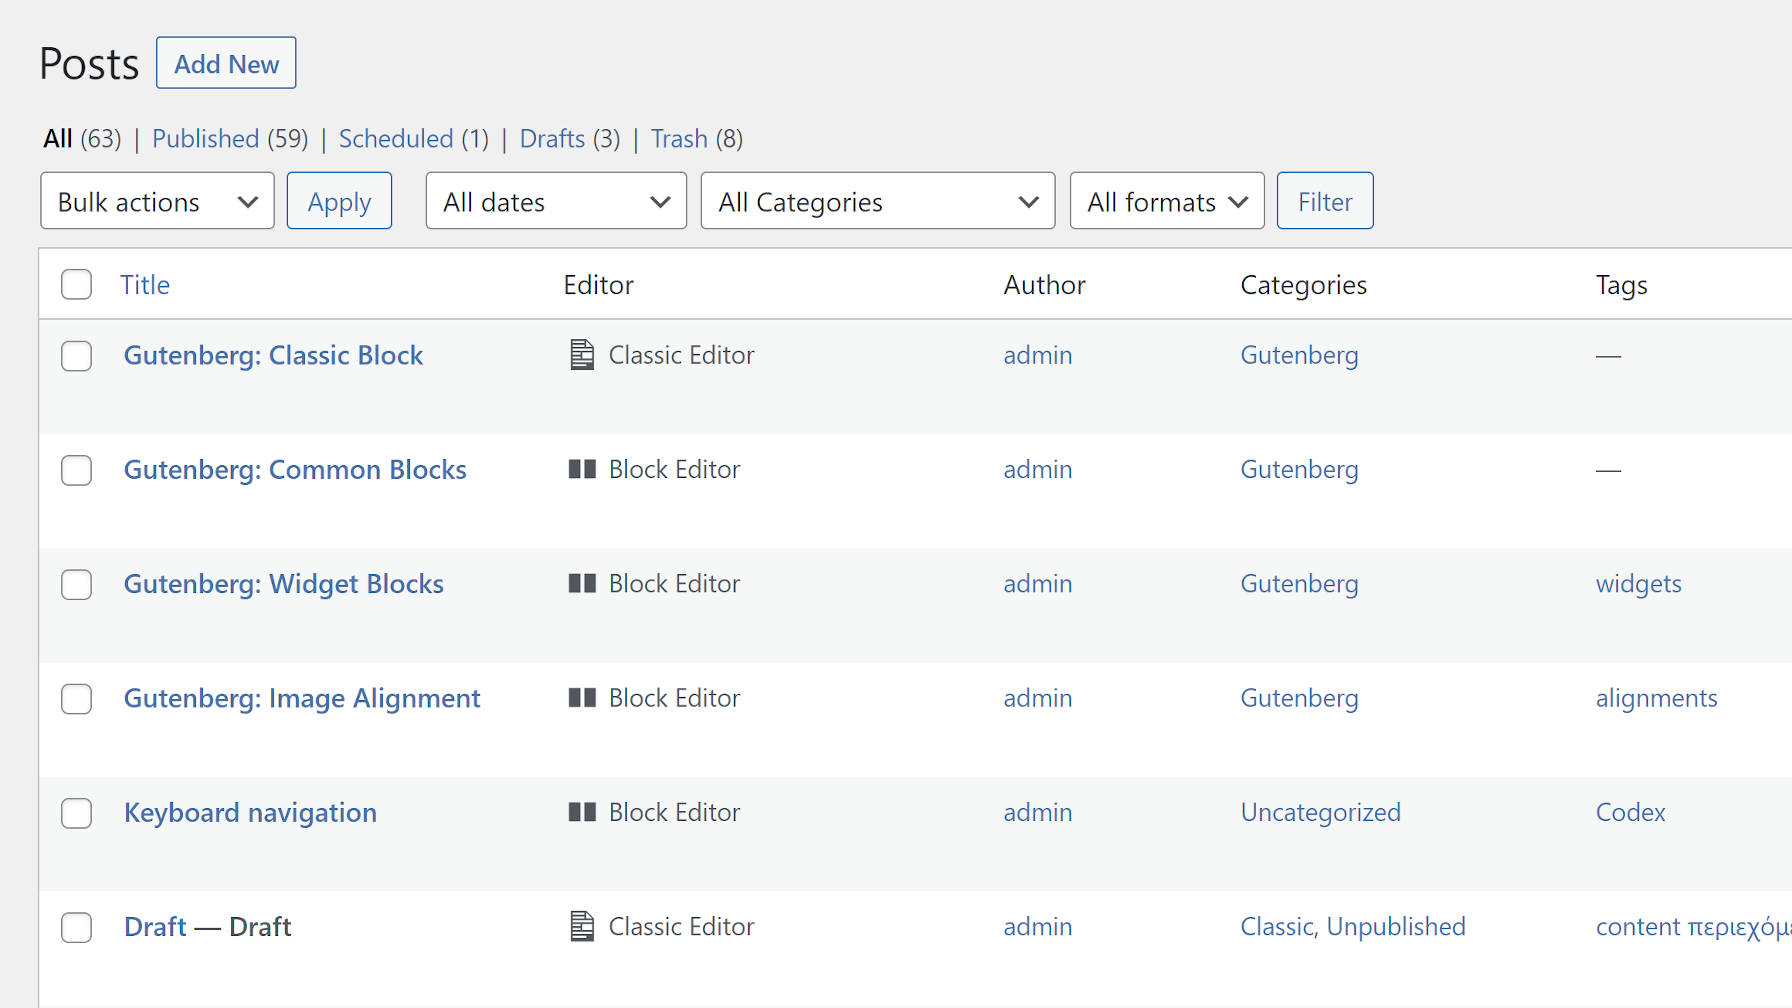 Manage posts screen with "Editor" column to distinguish between block and classic posts.